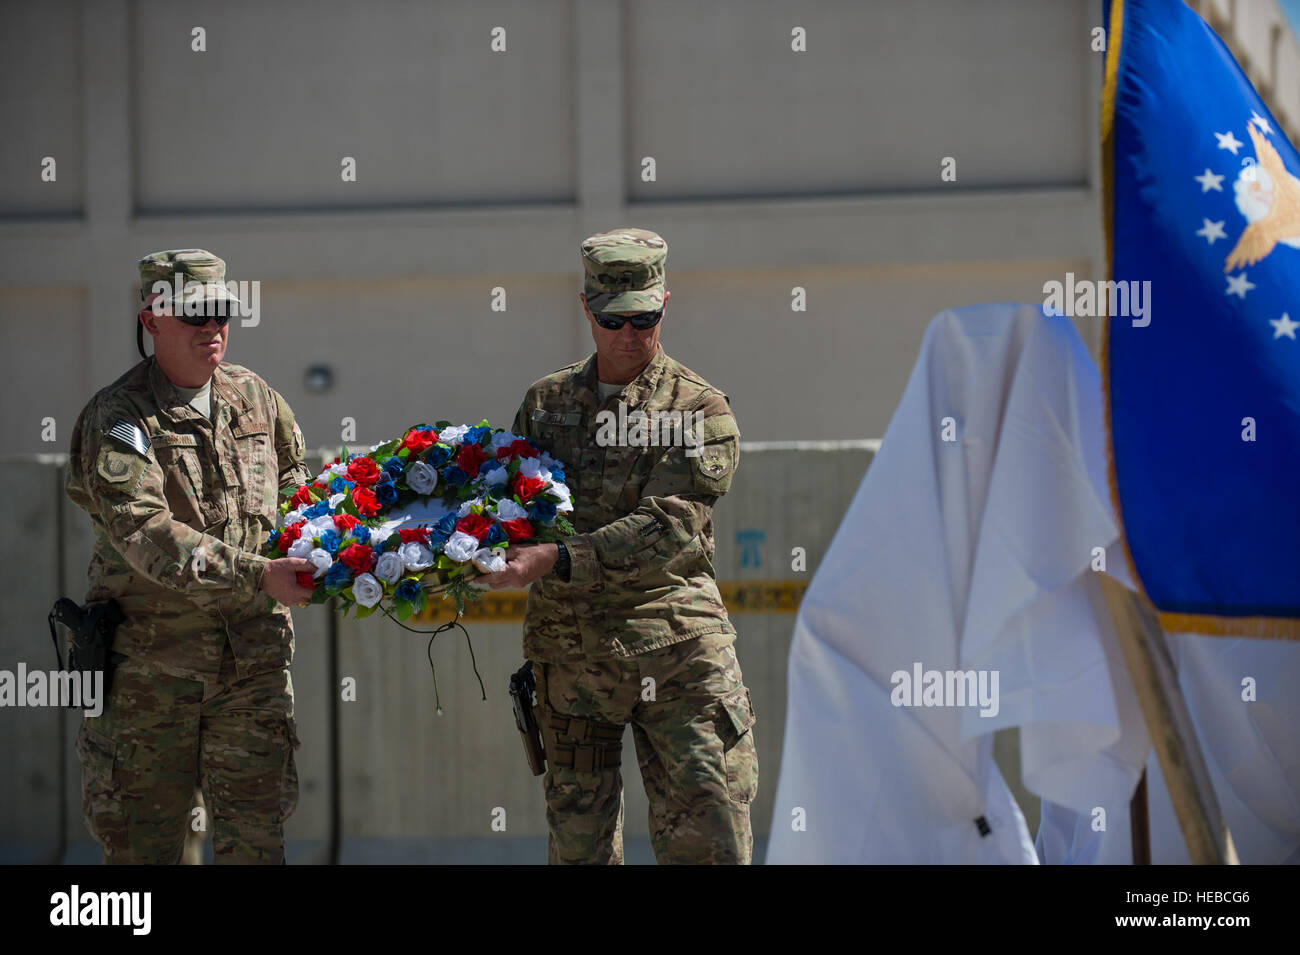 U.S. Air Force Brig. Gen. Mark D. Kelly, right, 455th Air Expeditionary Wing commander, and Chief Master Sgt. Jeffery Brown, 455th AEW command chief, place a wreath in front of the Air Force flag during the U.S. Forces Afghanistan Memorial Day observance ceremony at Bagram Air Field, Afghanistan, May 25, 2015. Memorial Day is dedicated to remembering U.S. men and women who gave their lives while in military service protecting and defending national interests. (U.S. Air Force photo by Tech Sgt. Joseph Swafford/Released) Stock Photo